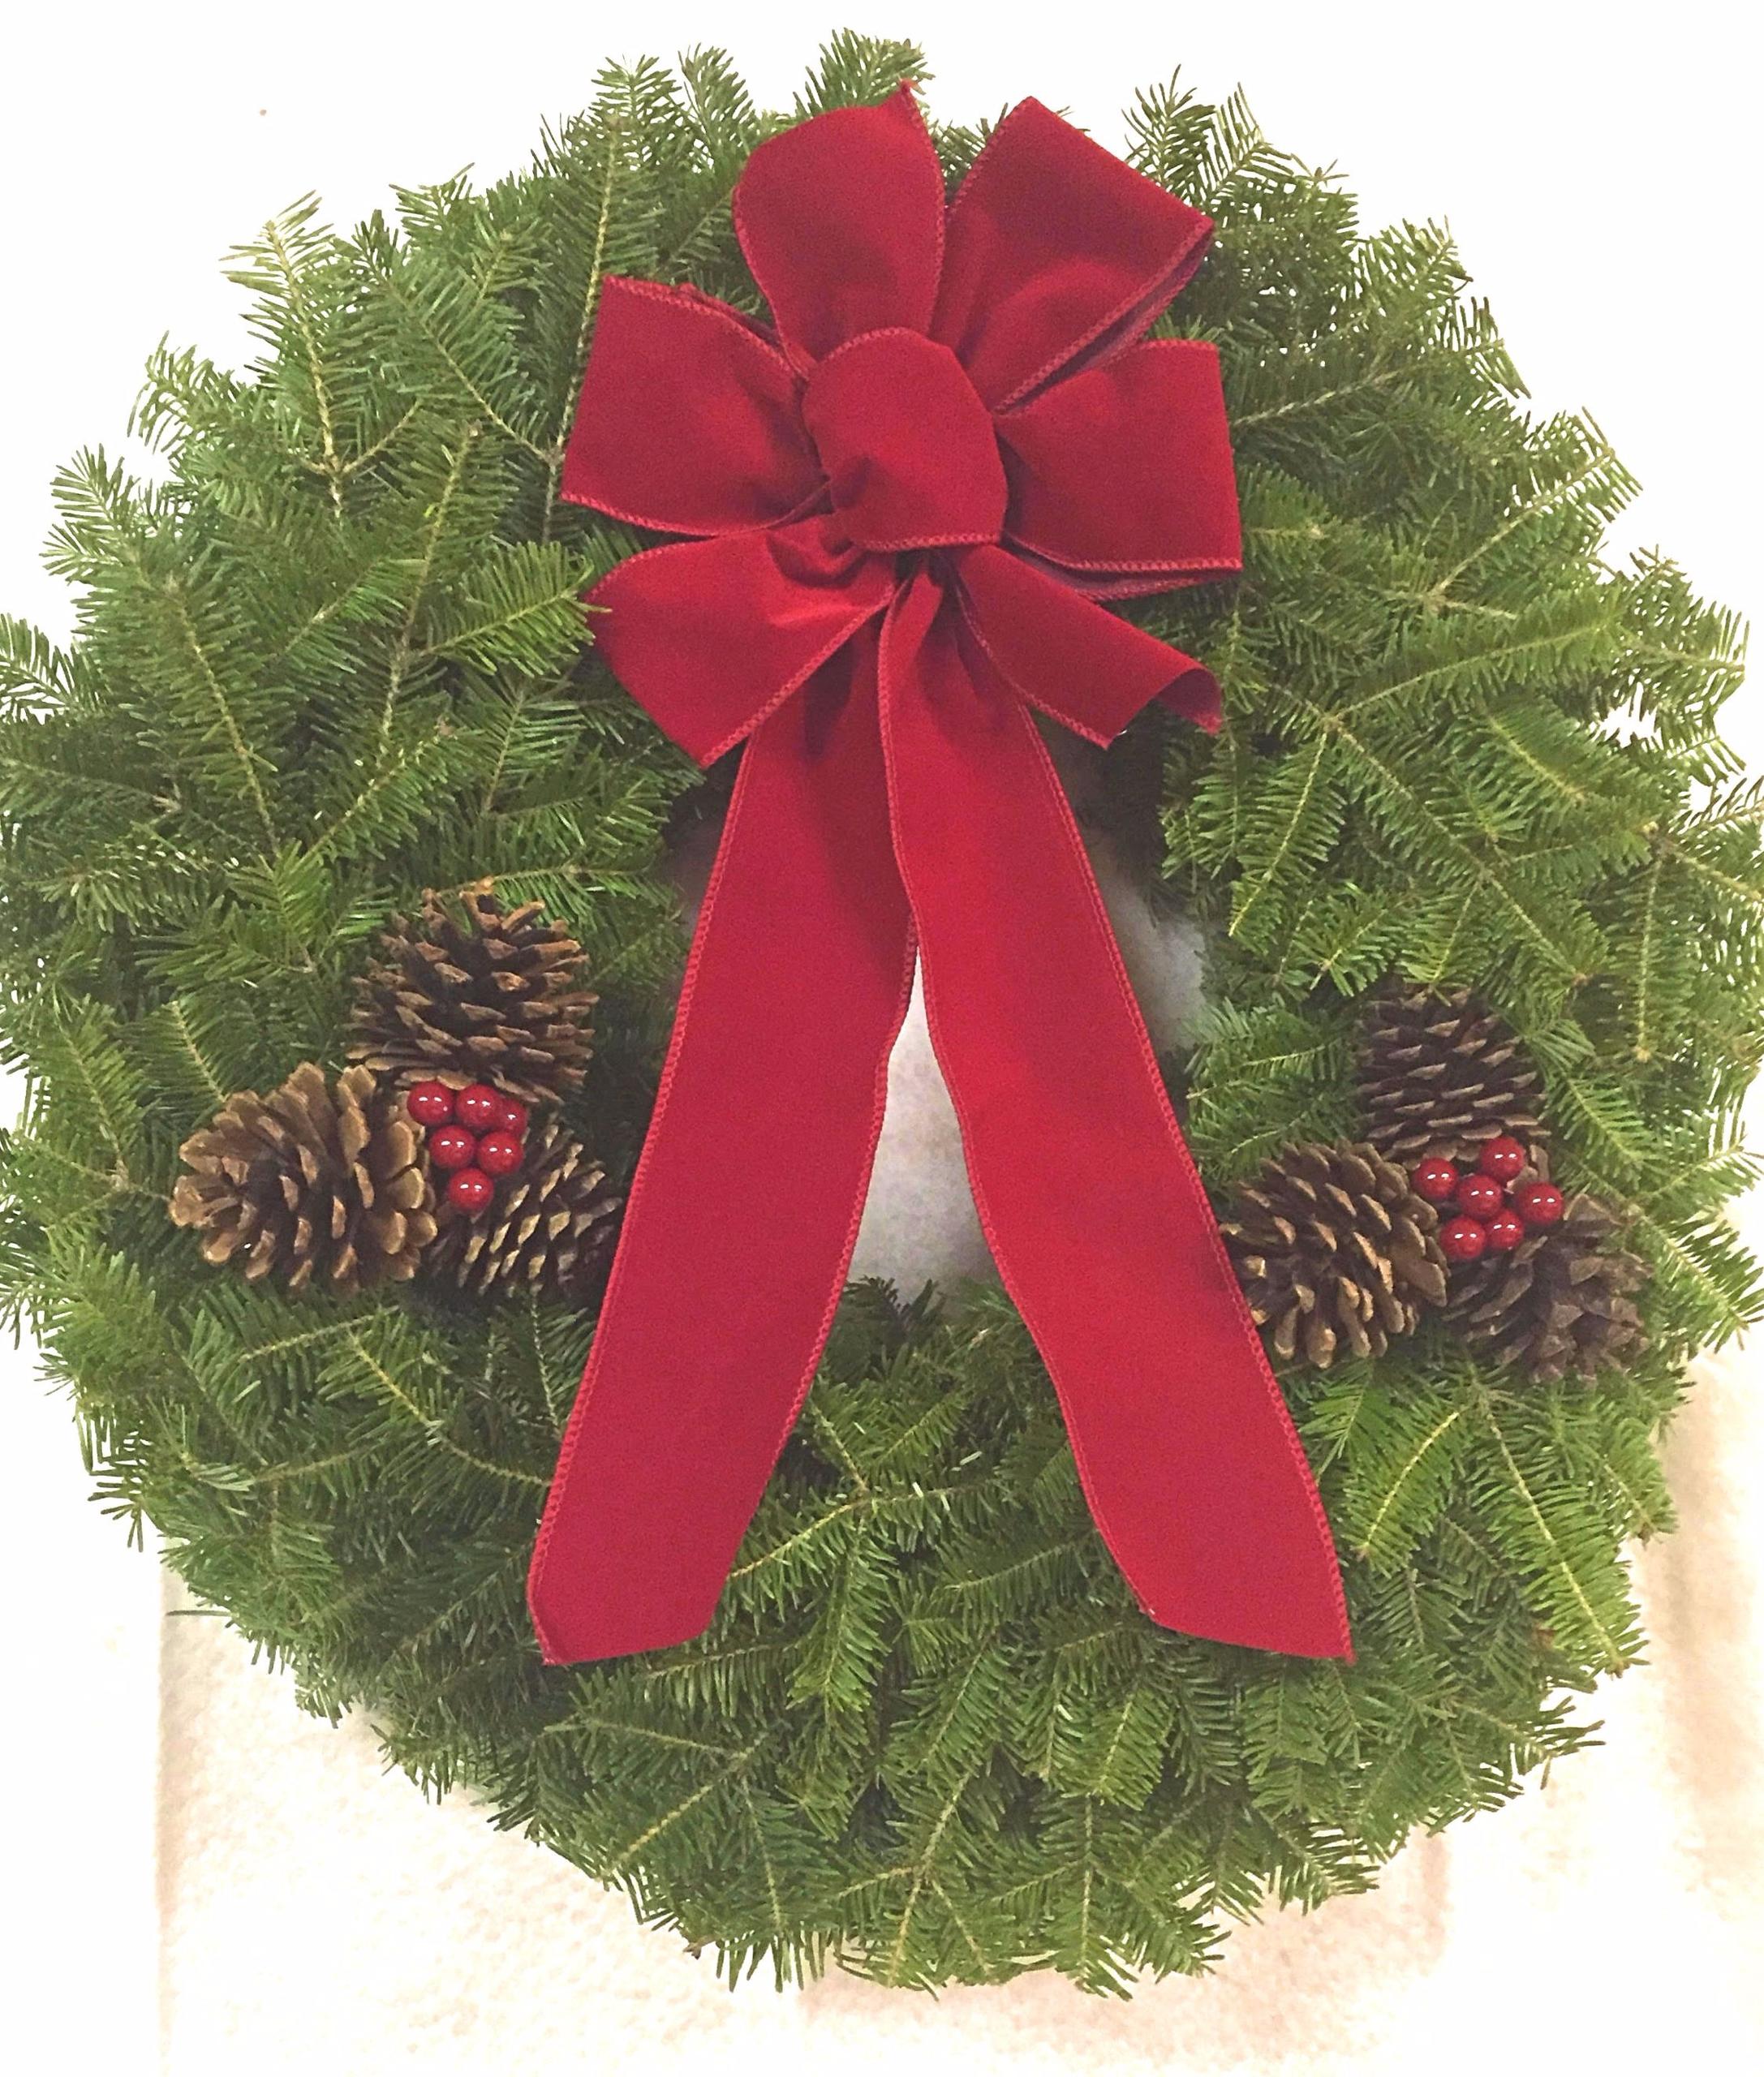 Fresh Maine Balsam Christmas Wreath Wreaths APX  24-inch New Red Bow 